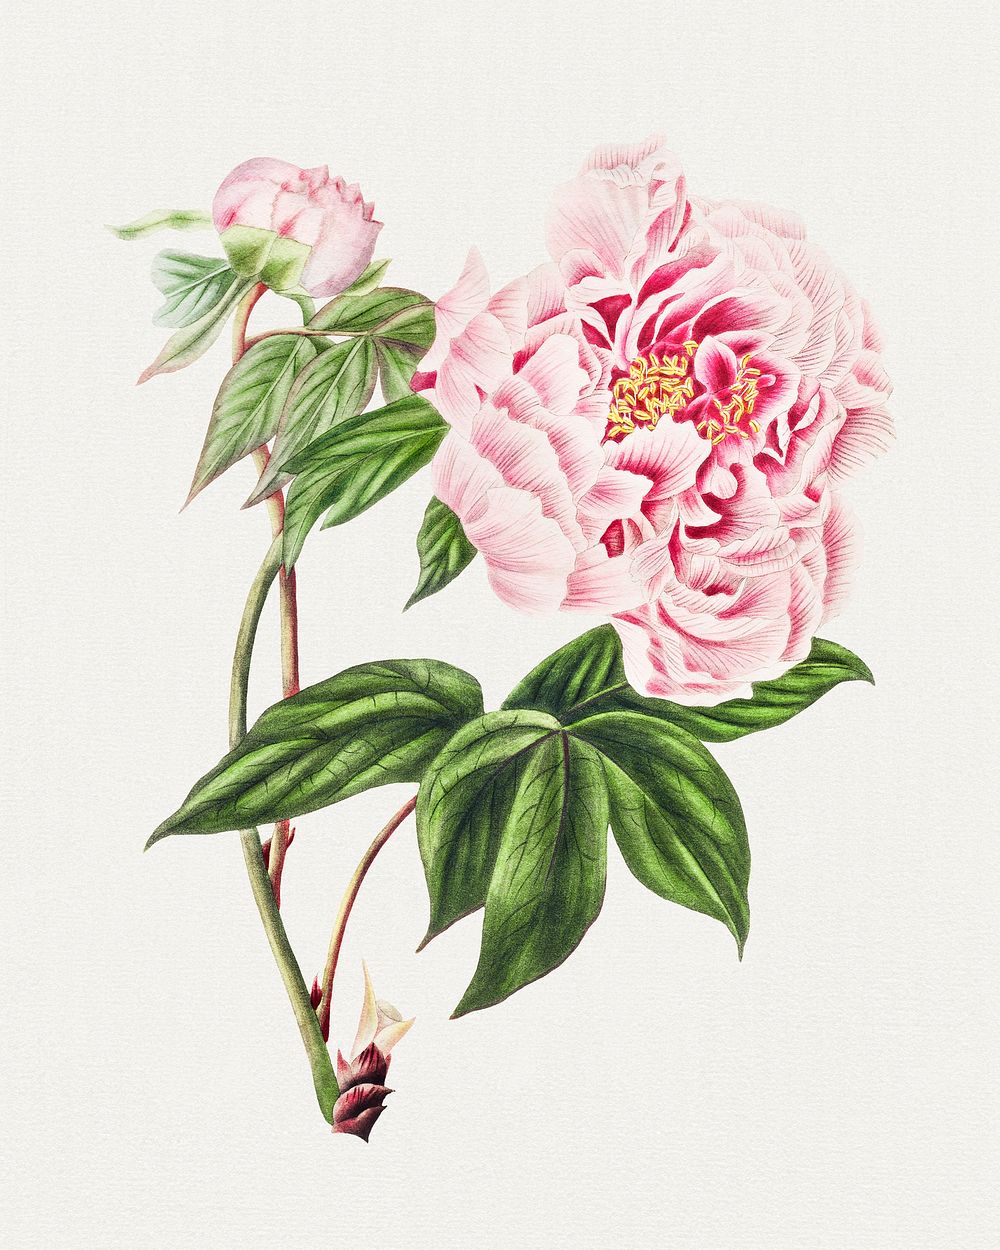 Chinese Tree Peony (Paeonia suffruticosa) (ca. 1820) by Smith. Original from The Cleveland Museum of Art. Digitally enhanced…